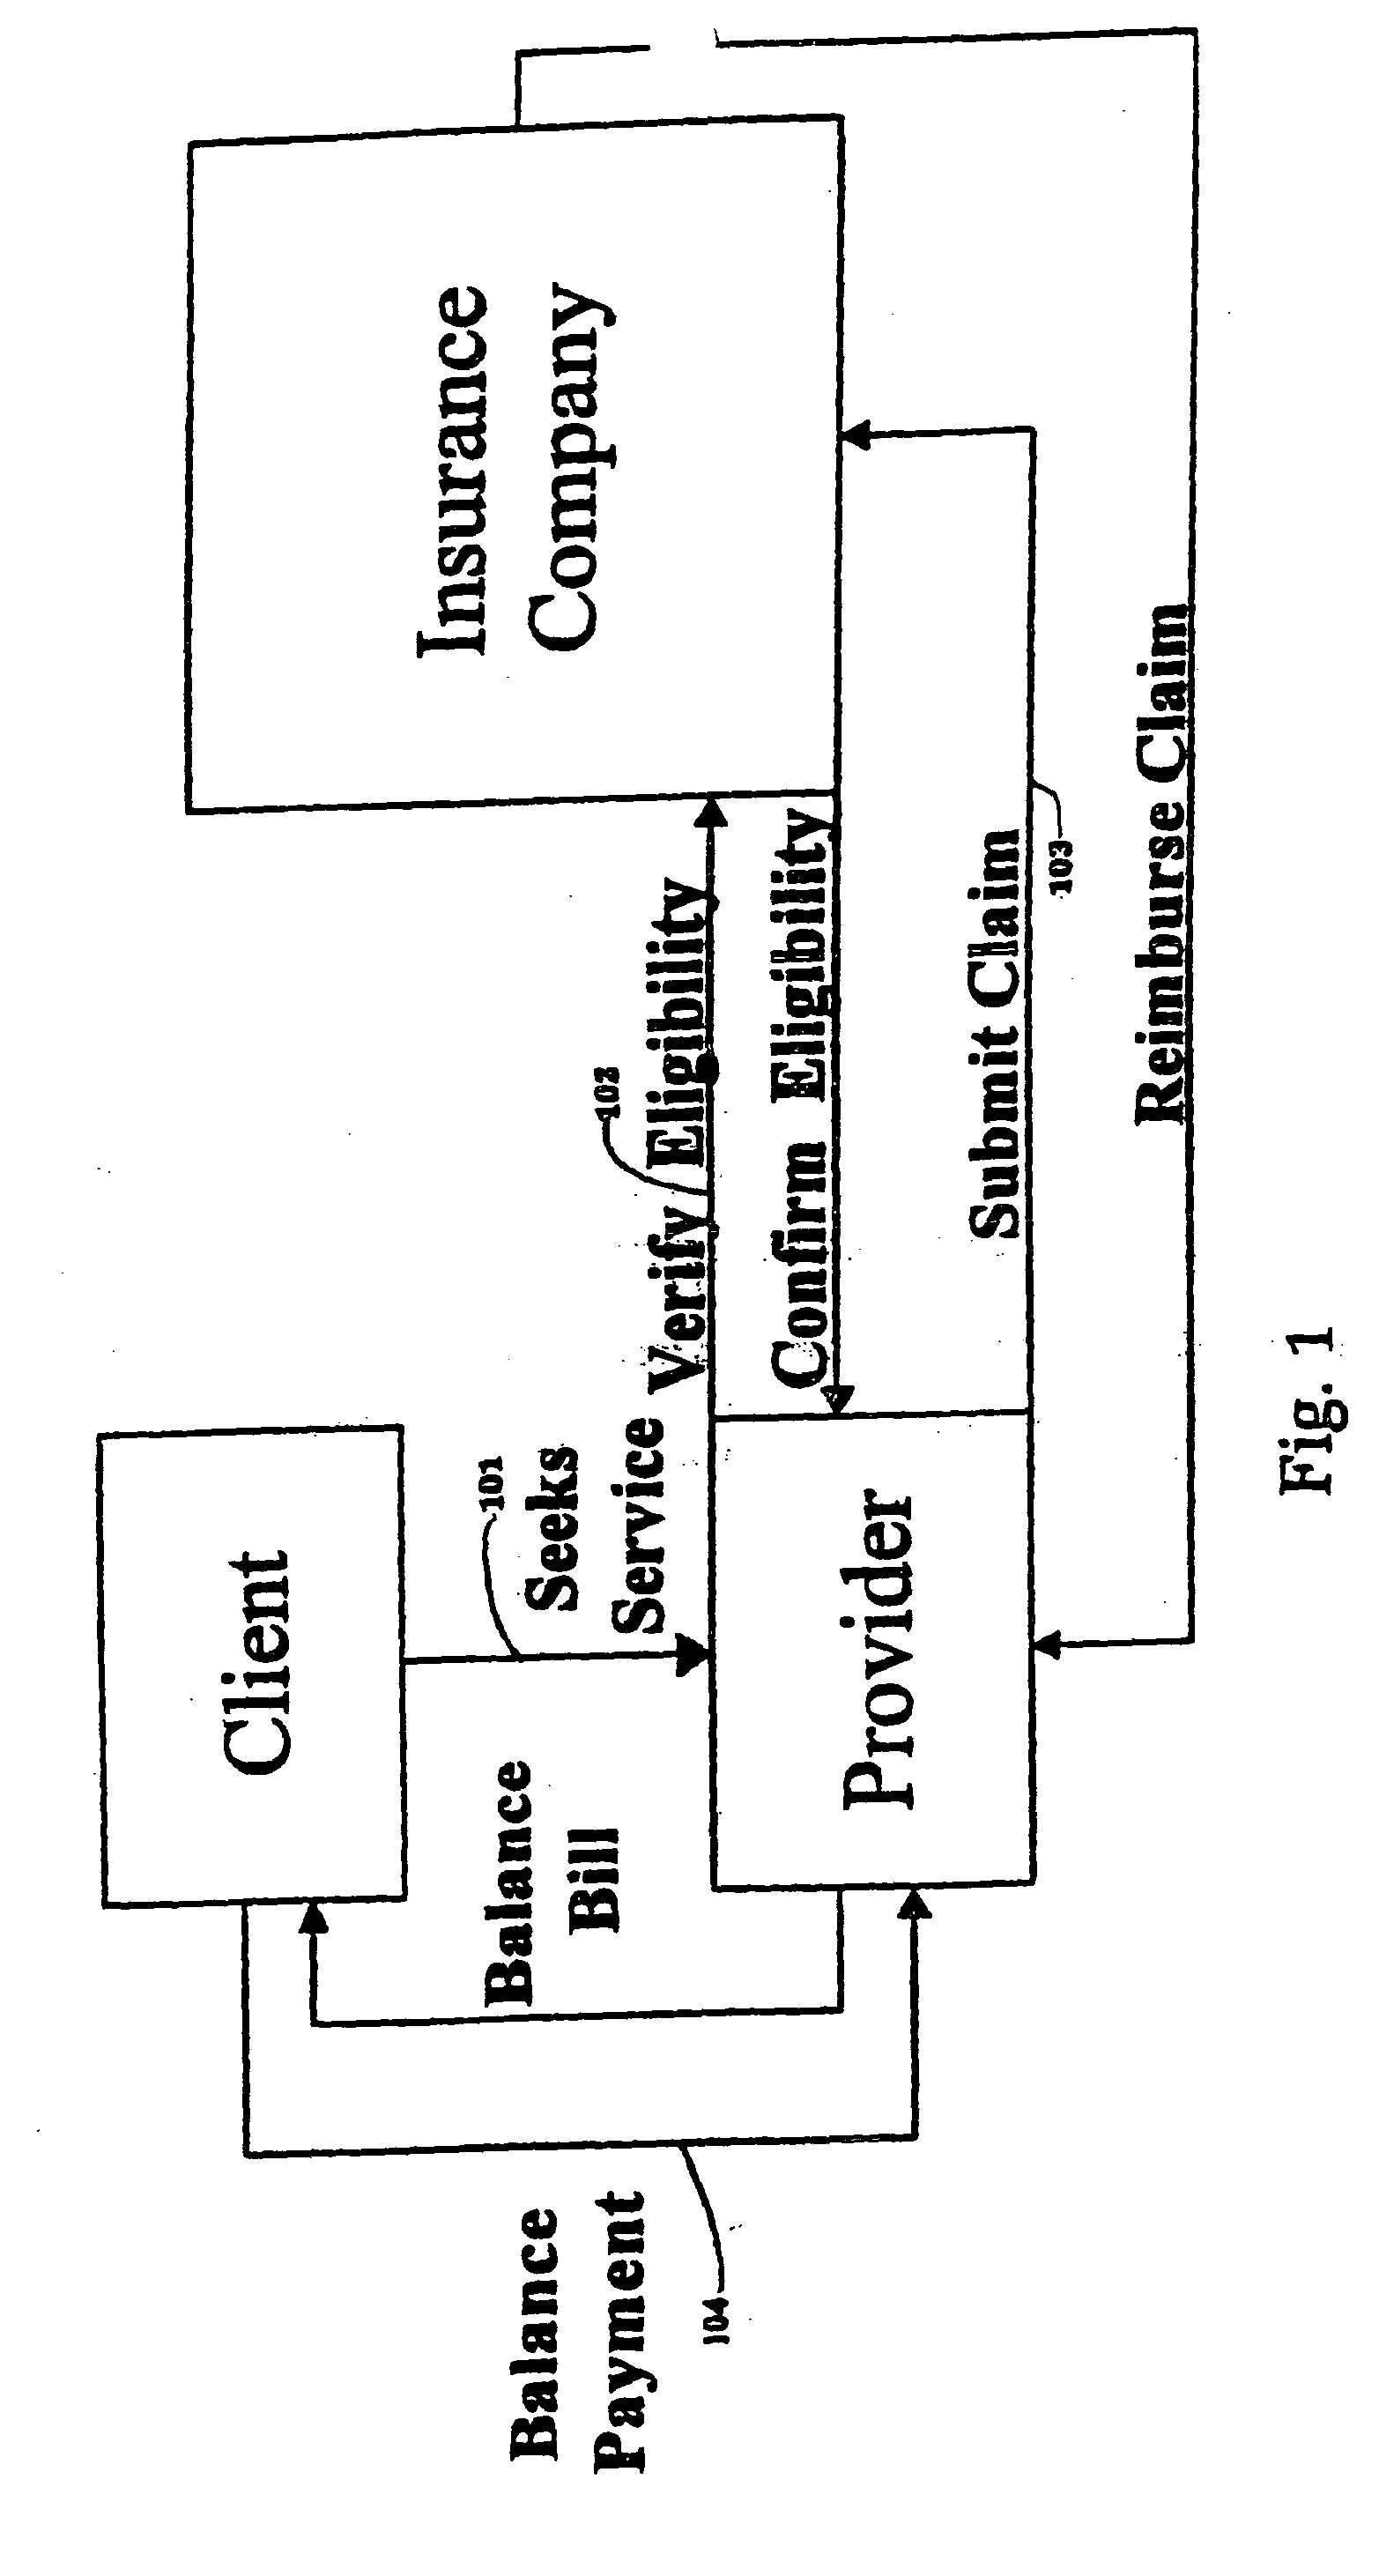 Method and apparatus for settling claims between health care providers and third party payers